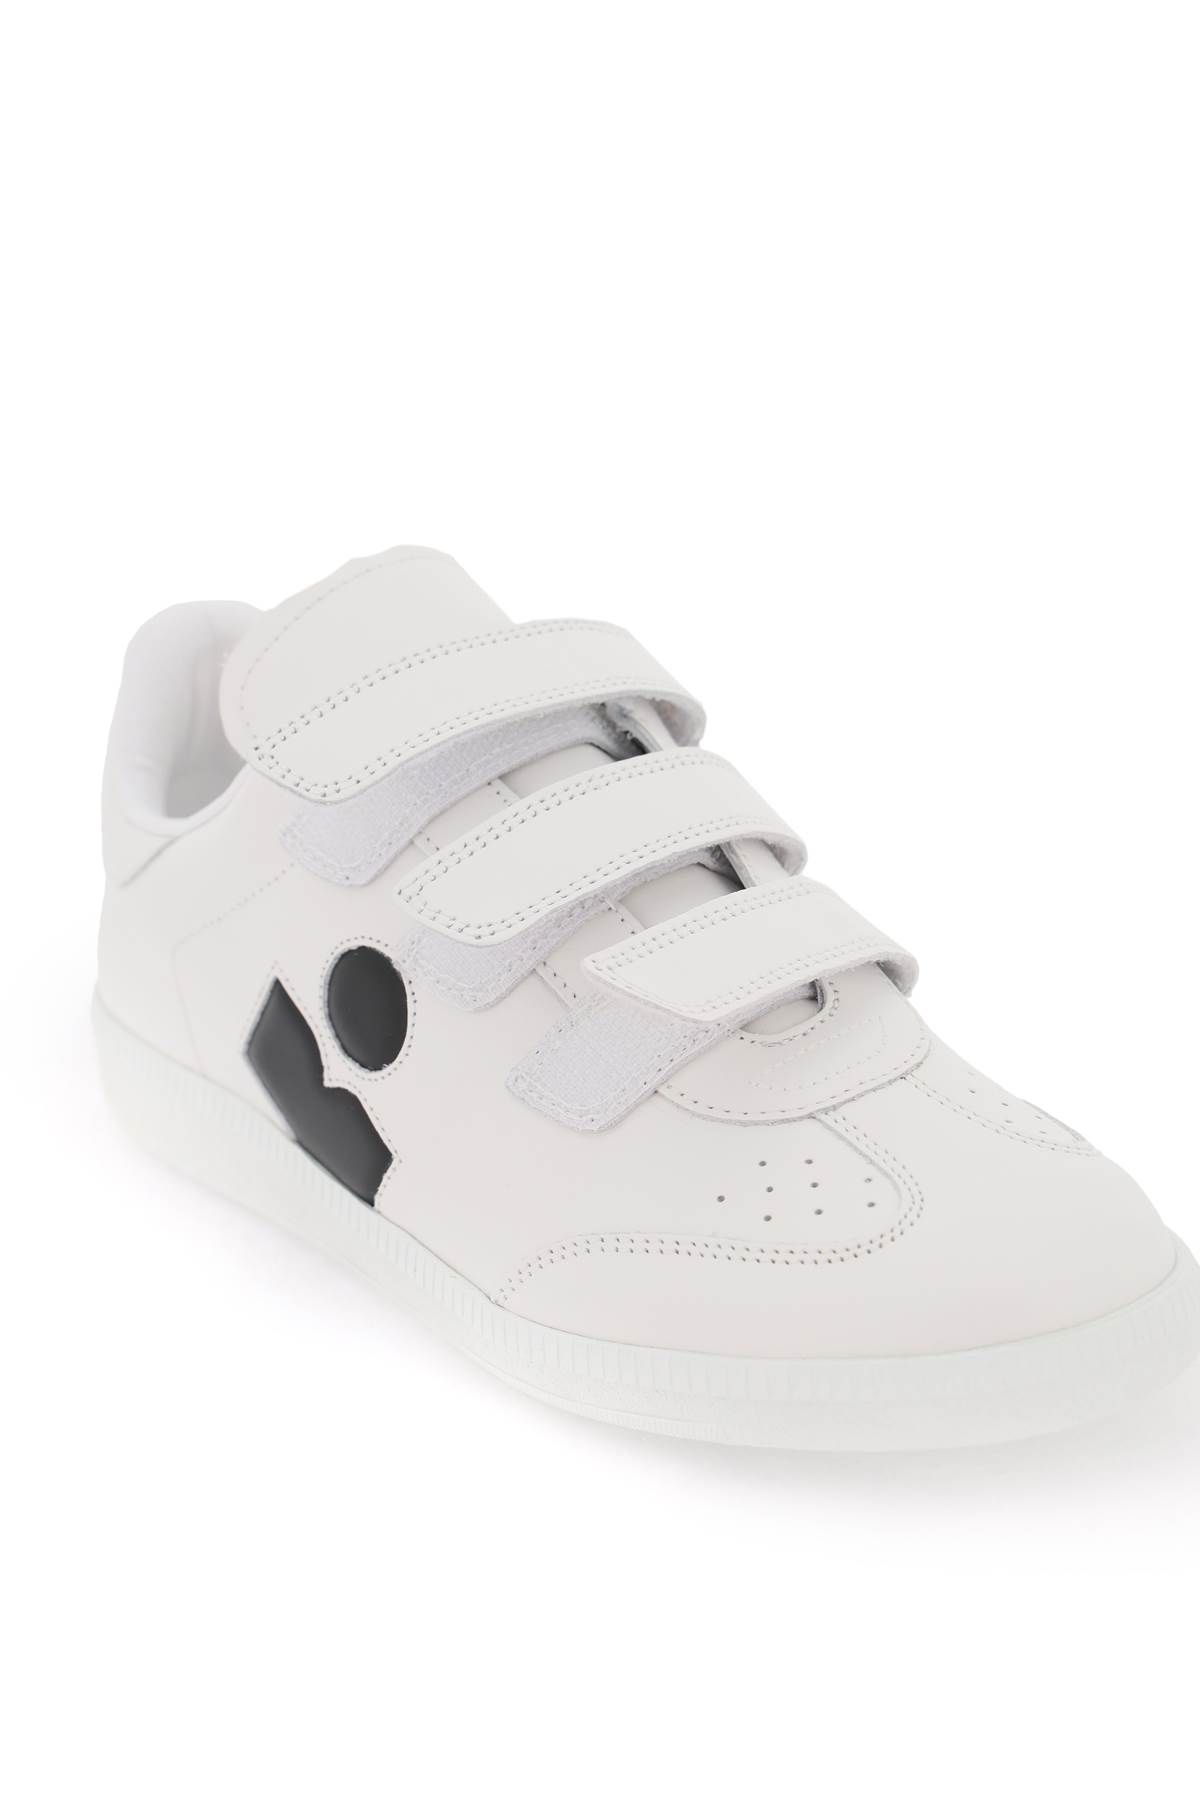 Shop Marant Etoile Beth Leather Sneakers In White